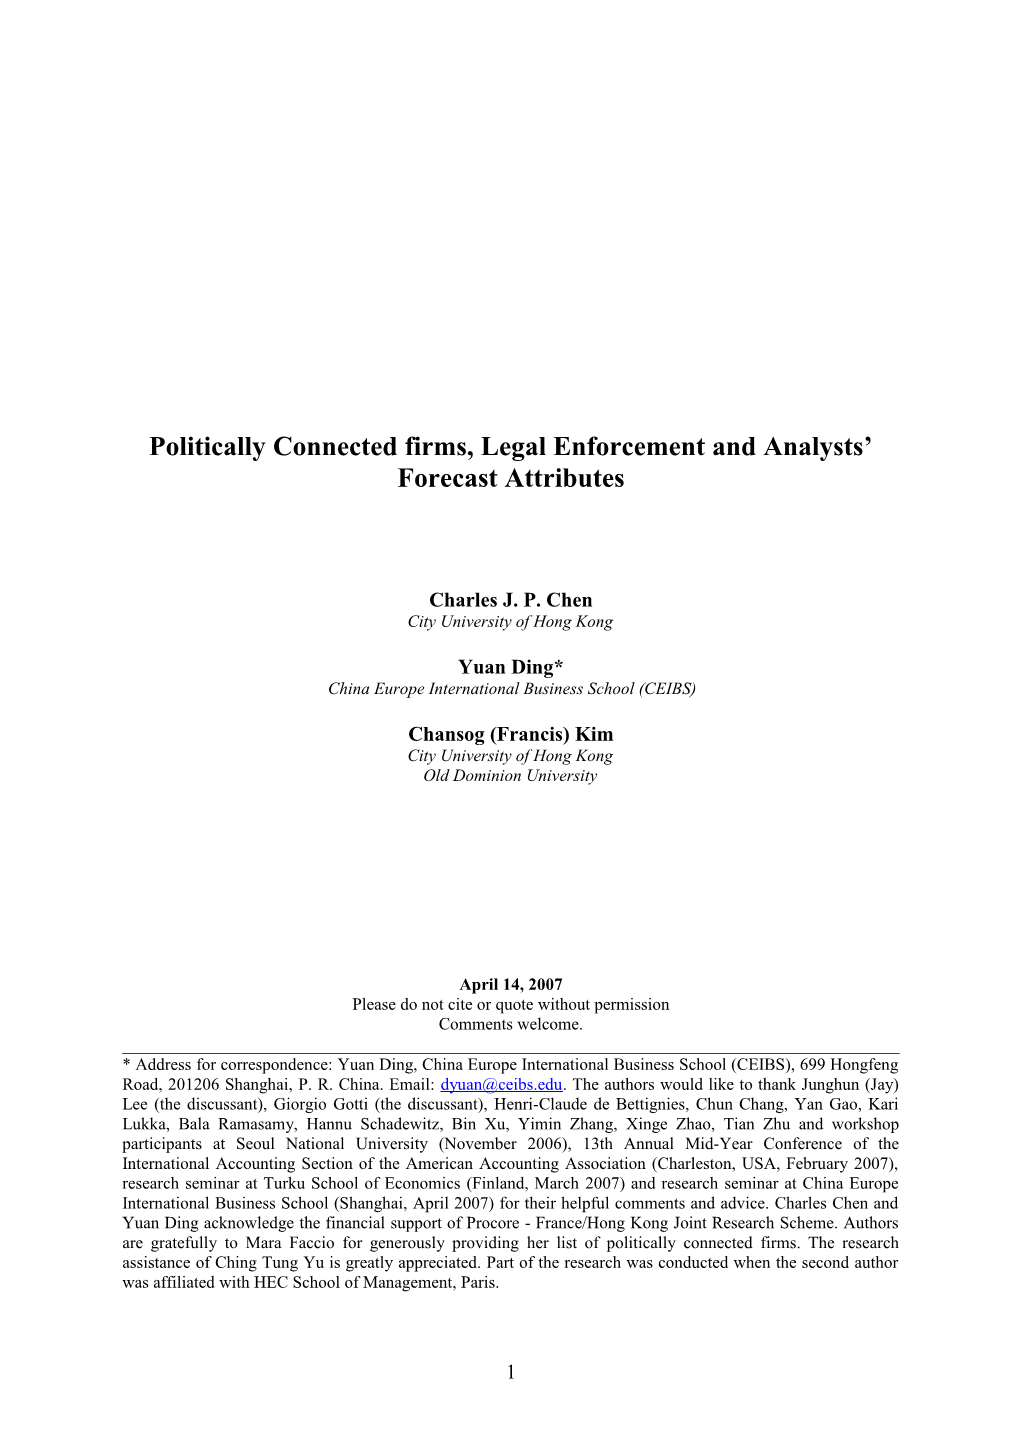 Political Connection, Legal Enforcement and Analysts Forecast Attributes